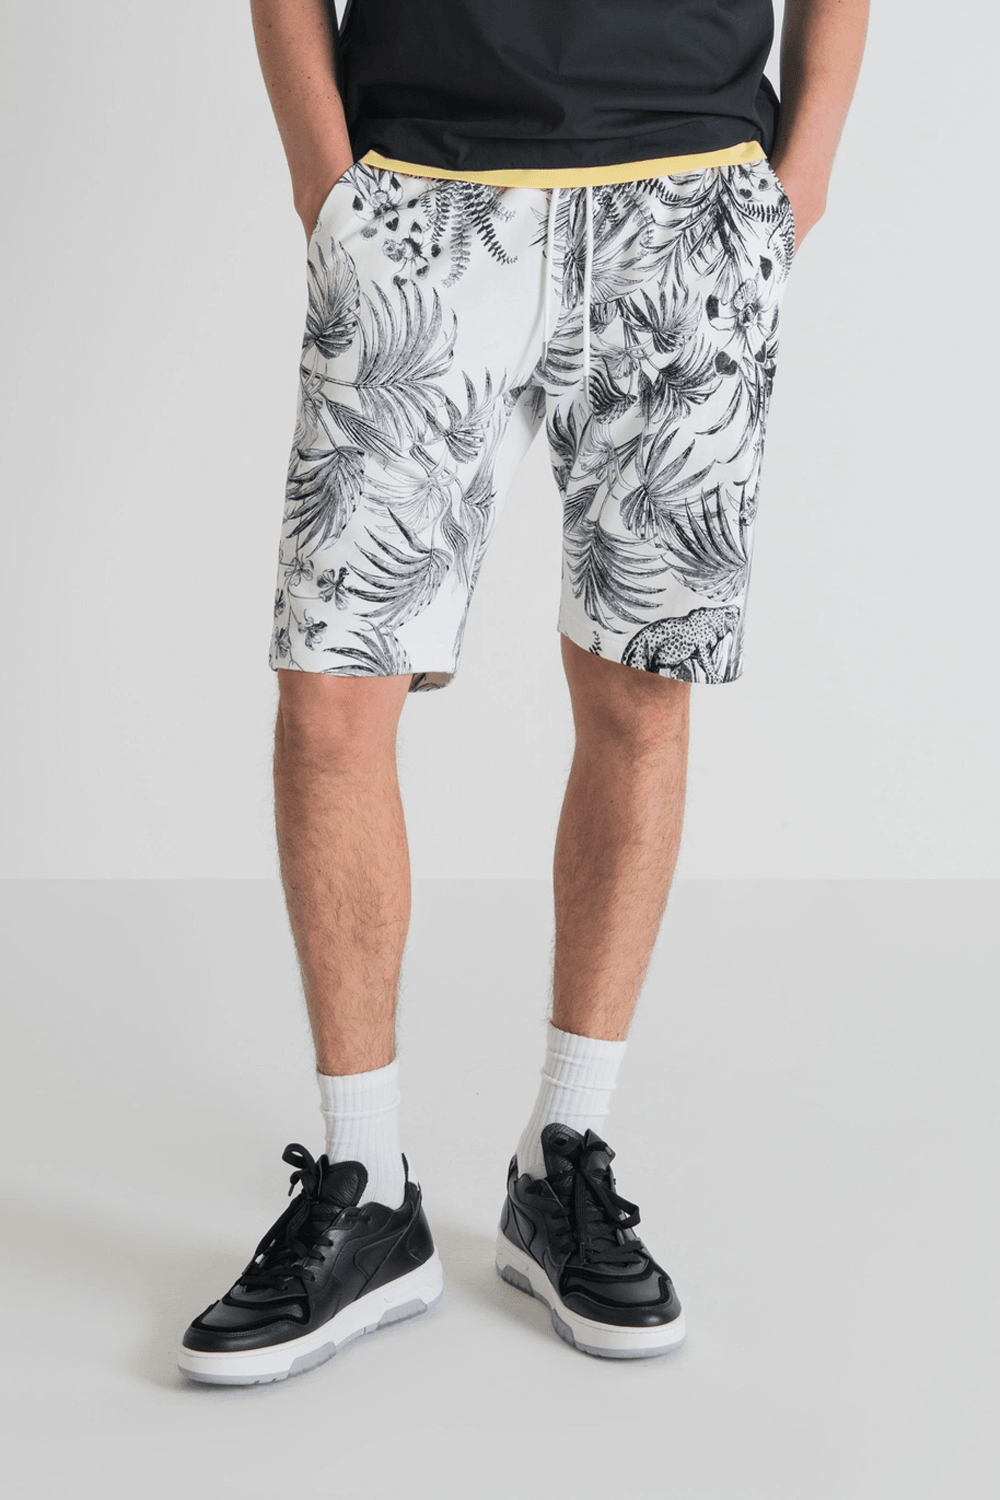 Buy the Antony Morato Honolulu Monochrome Short in Cream at Intro. Spend £50 for free UK delivery. Official stockists. We ship worldwide.